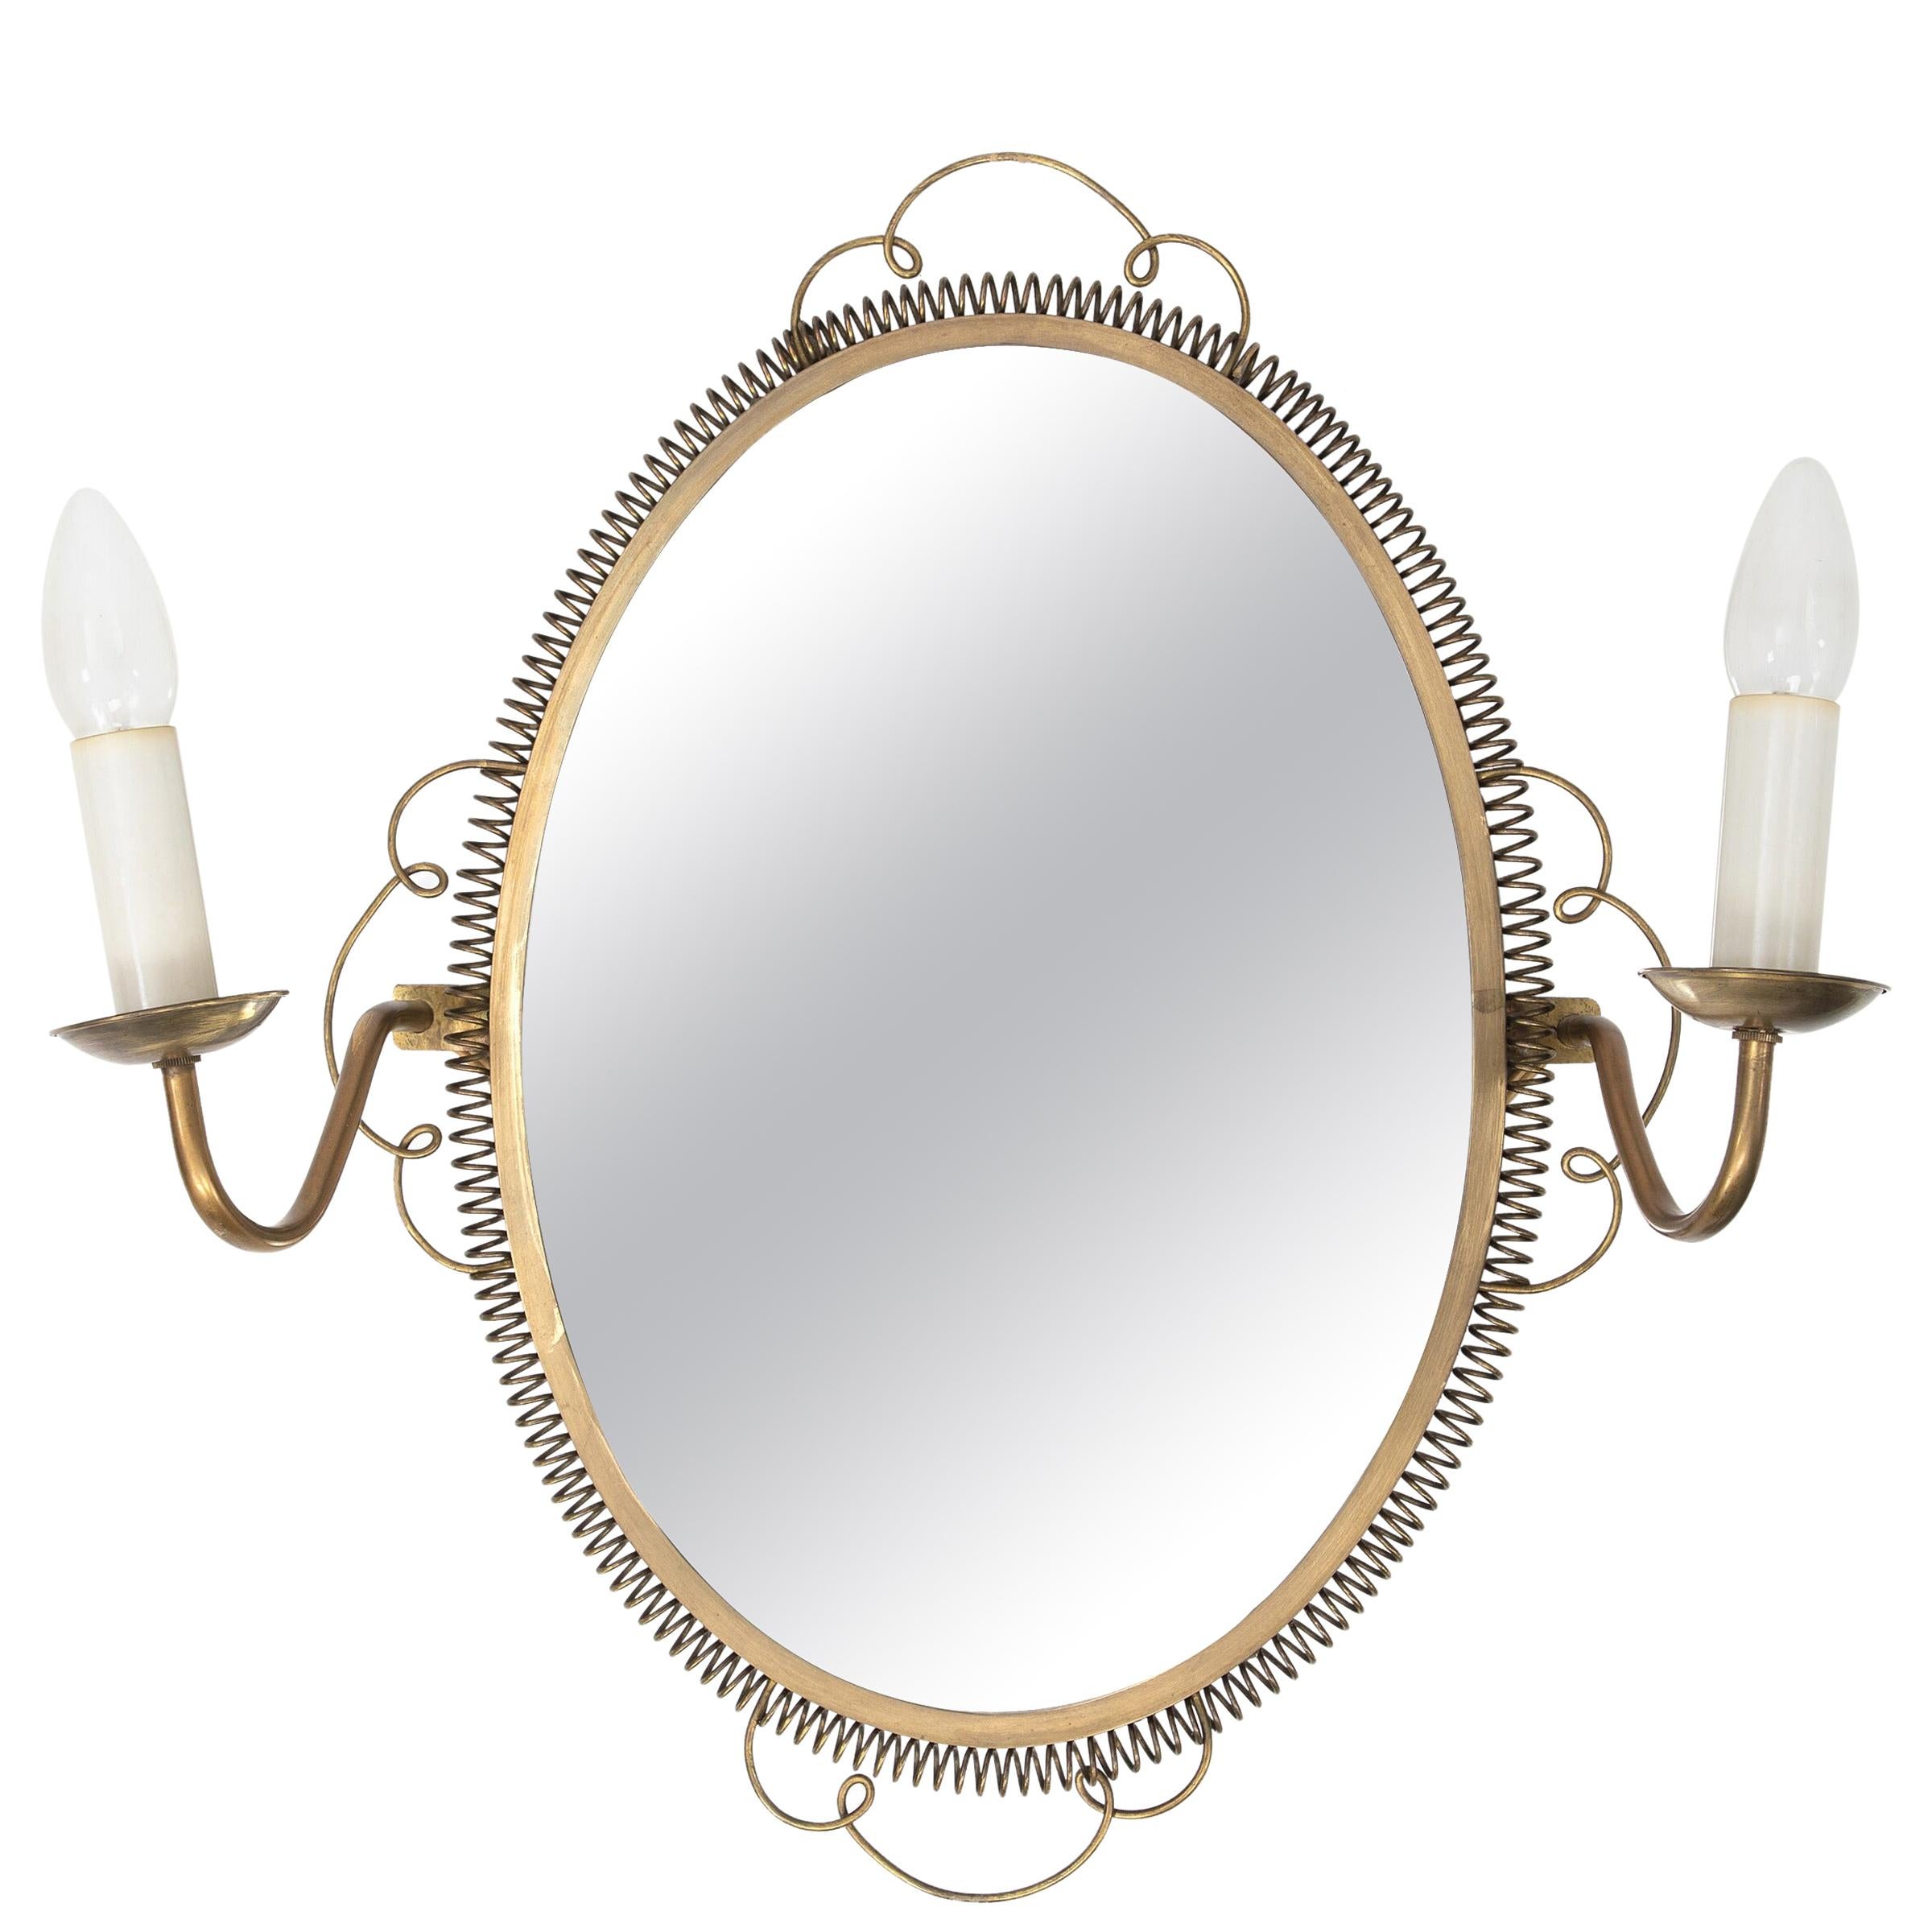 Vintage 1950s Swedish Brass Mirror with Sconces